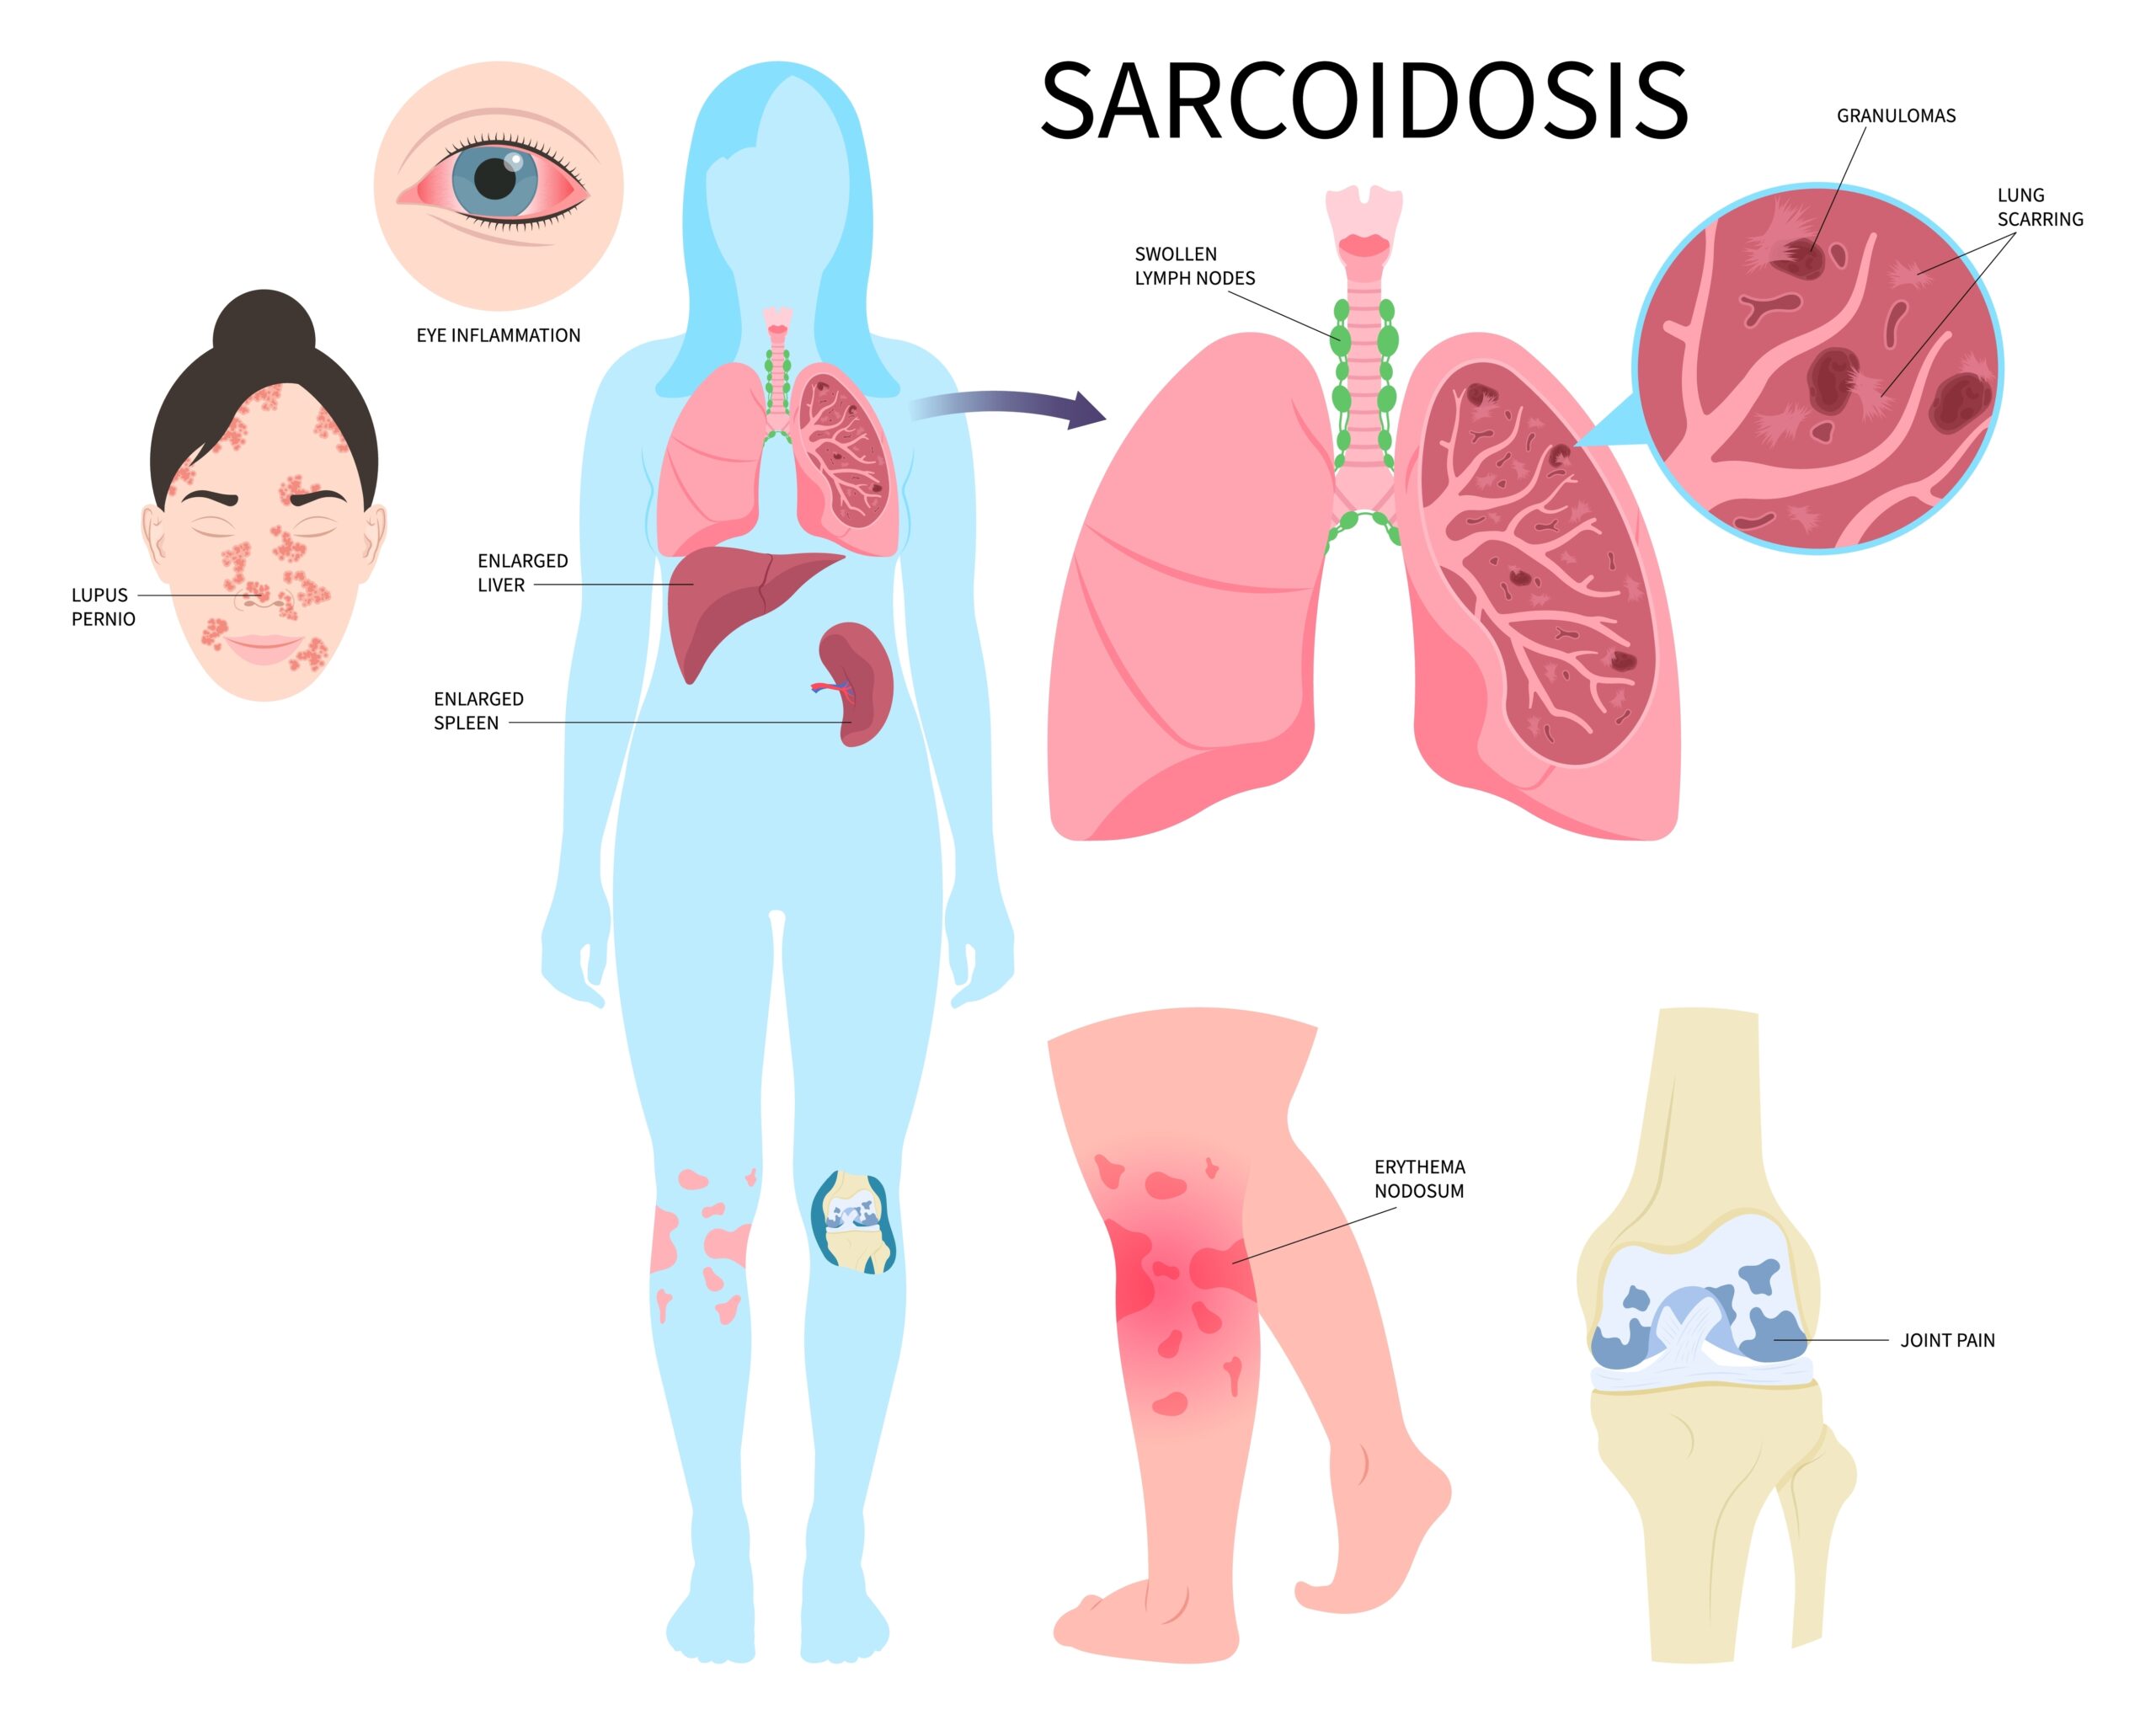 Sarcoidosis: What Is, Causes, Symptoms, and Treatment